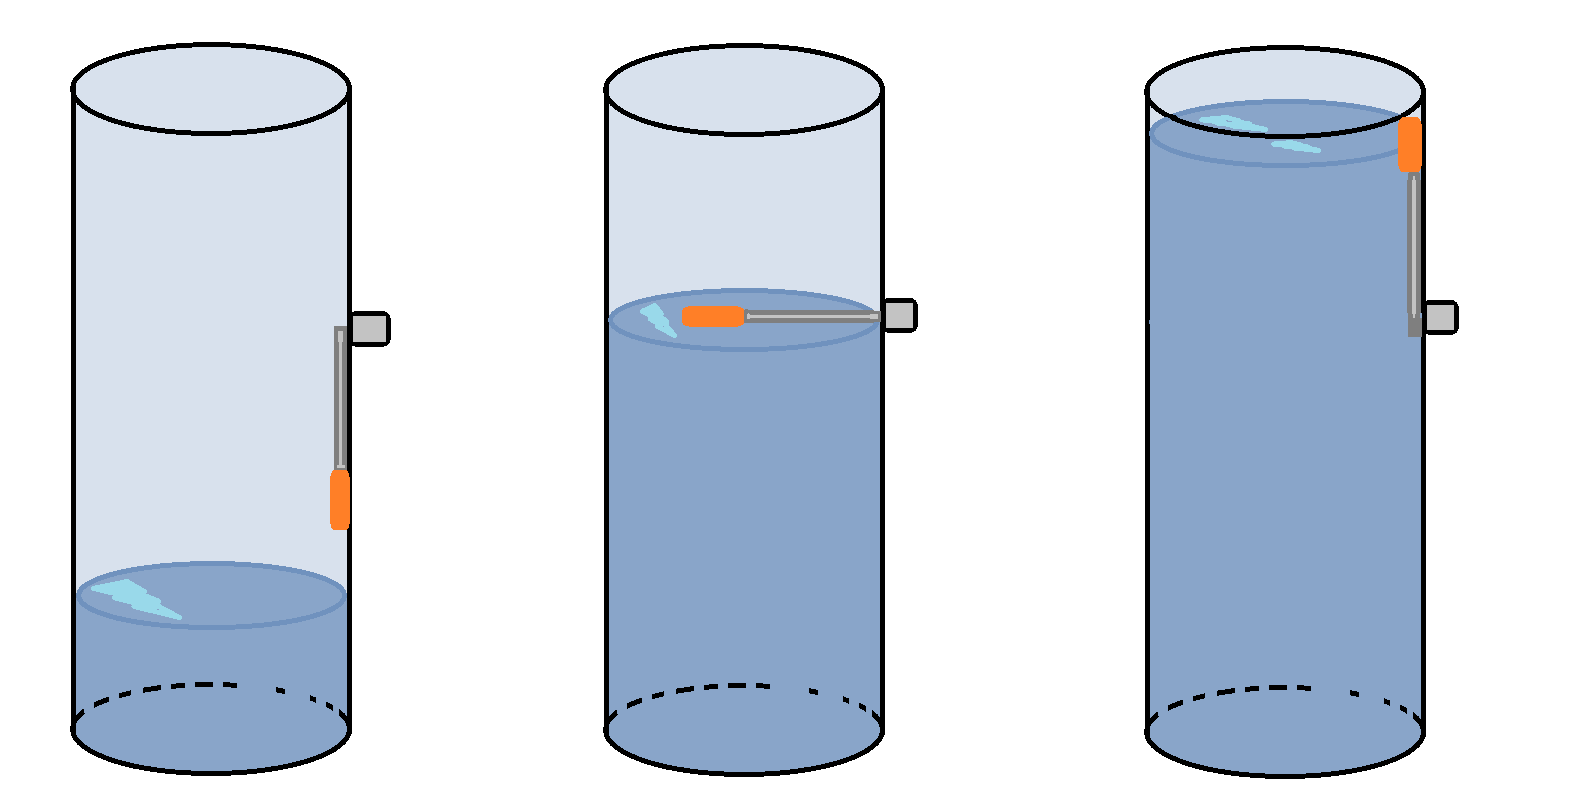 The water level rising at different stages from left to right. The floater is the orange circle and it moves depending on the level of the water.